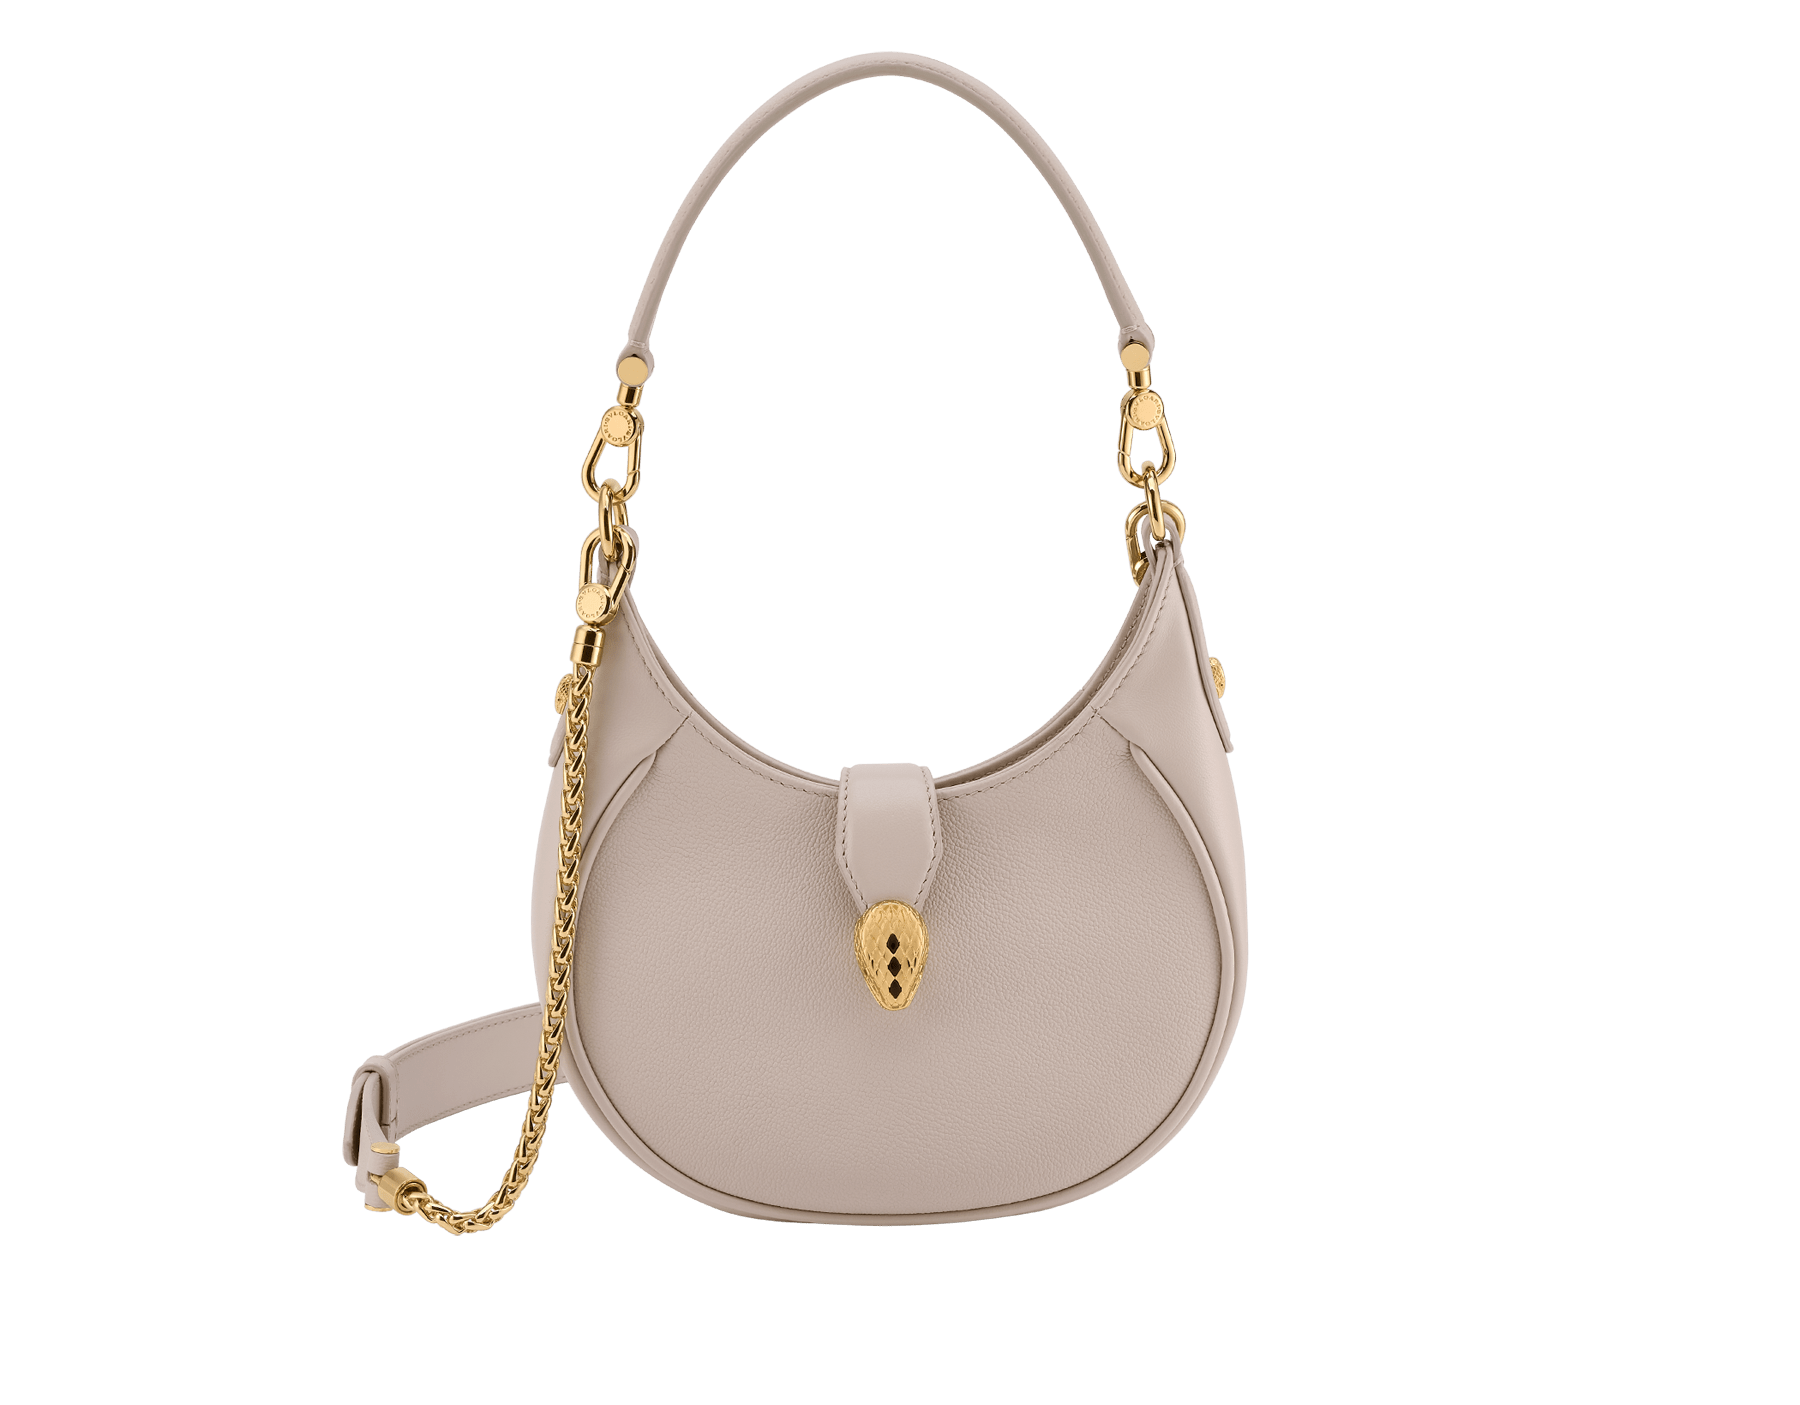 Serpenti Ellipse small crossbody bag in Urban grain and smooth ivory opal calf leather with flamingo quartz pink grosgrain lining. Captivating snakehead closure in gold-plated brass embellished with black onyx scales and red enamel eyes. 1204-UCLa image 1